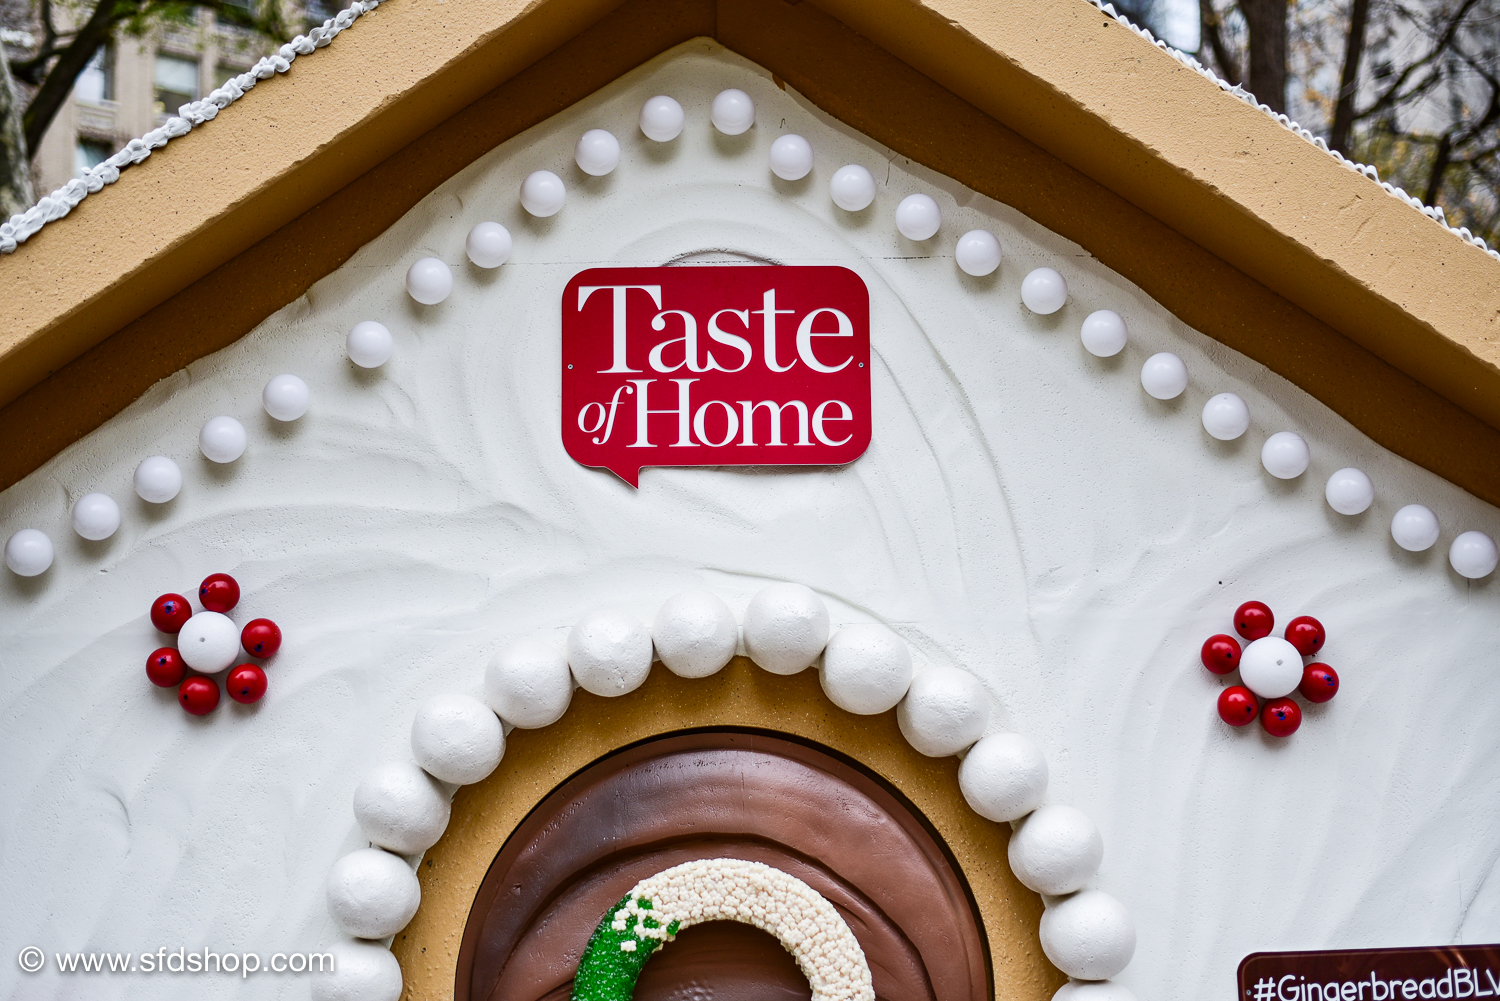 Taste of Home Gingerbread Blvd 2017 fabricated by SFDS-18.jpg